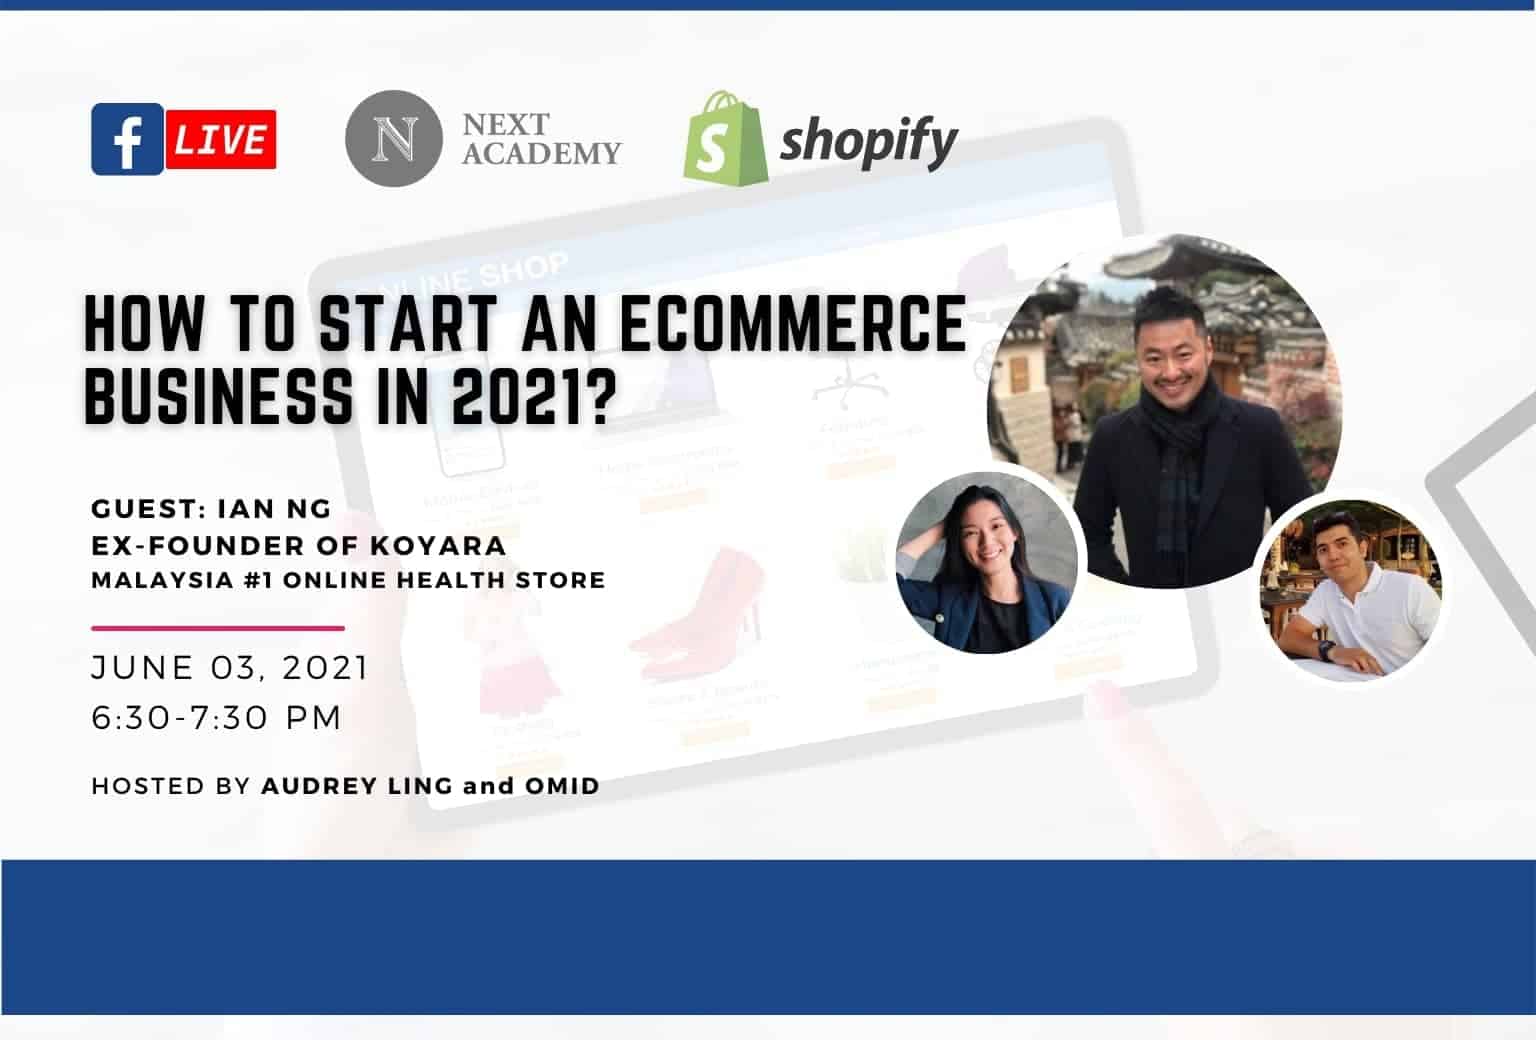 how to start an eCommerce in 2021? With Ian Ng, Ex-Founder of Koyara